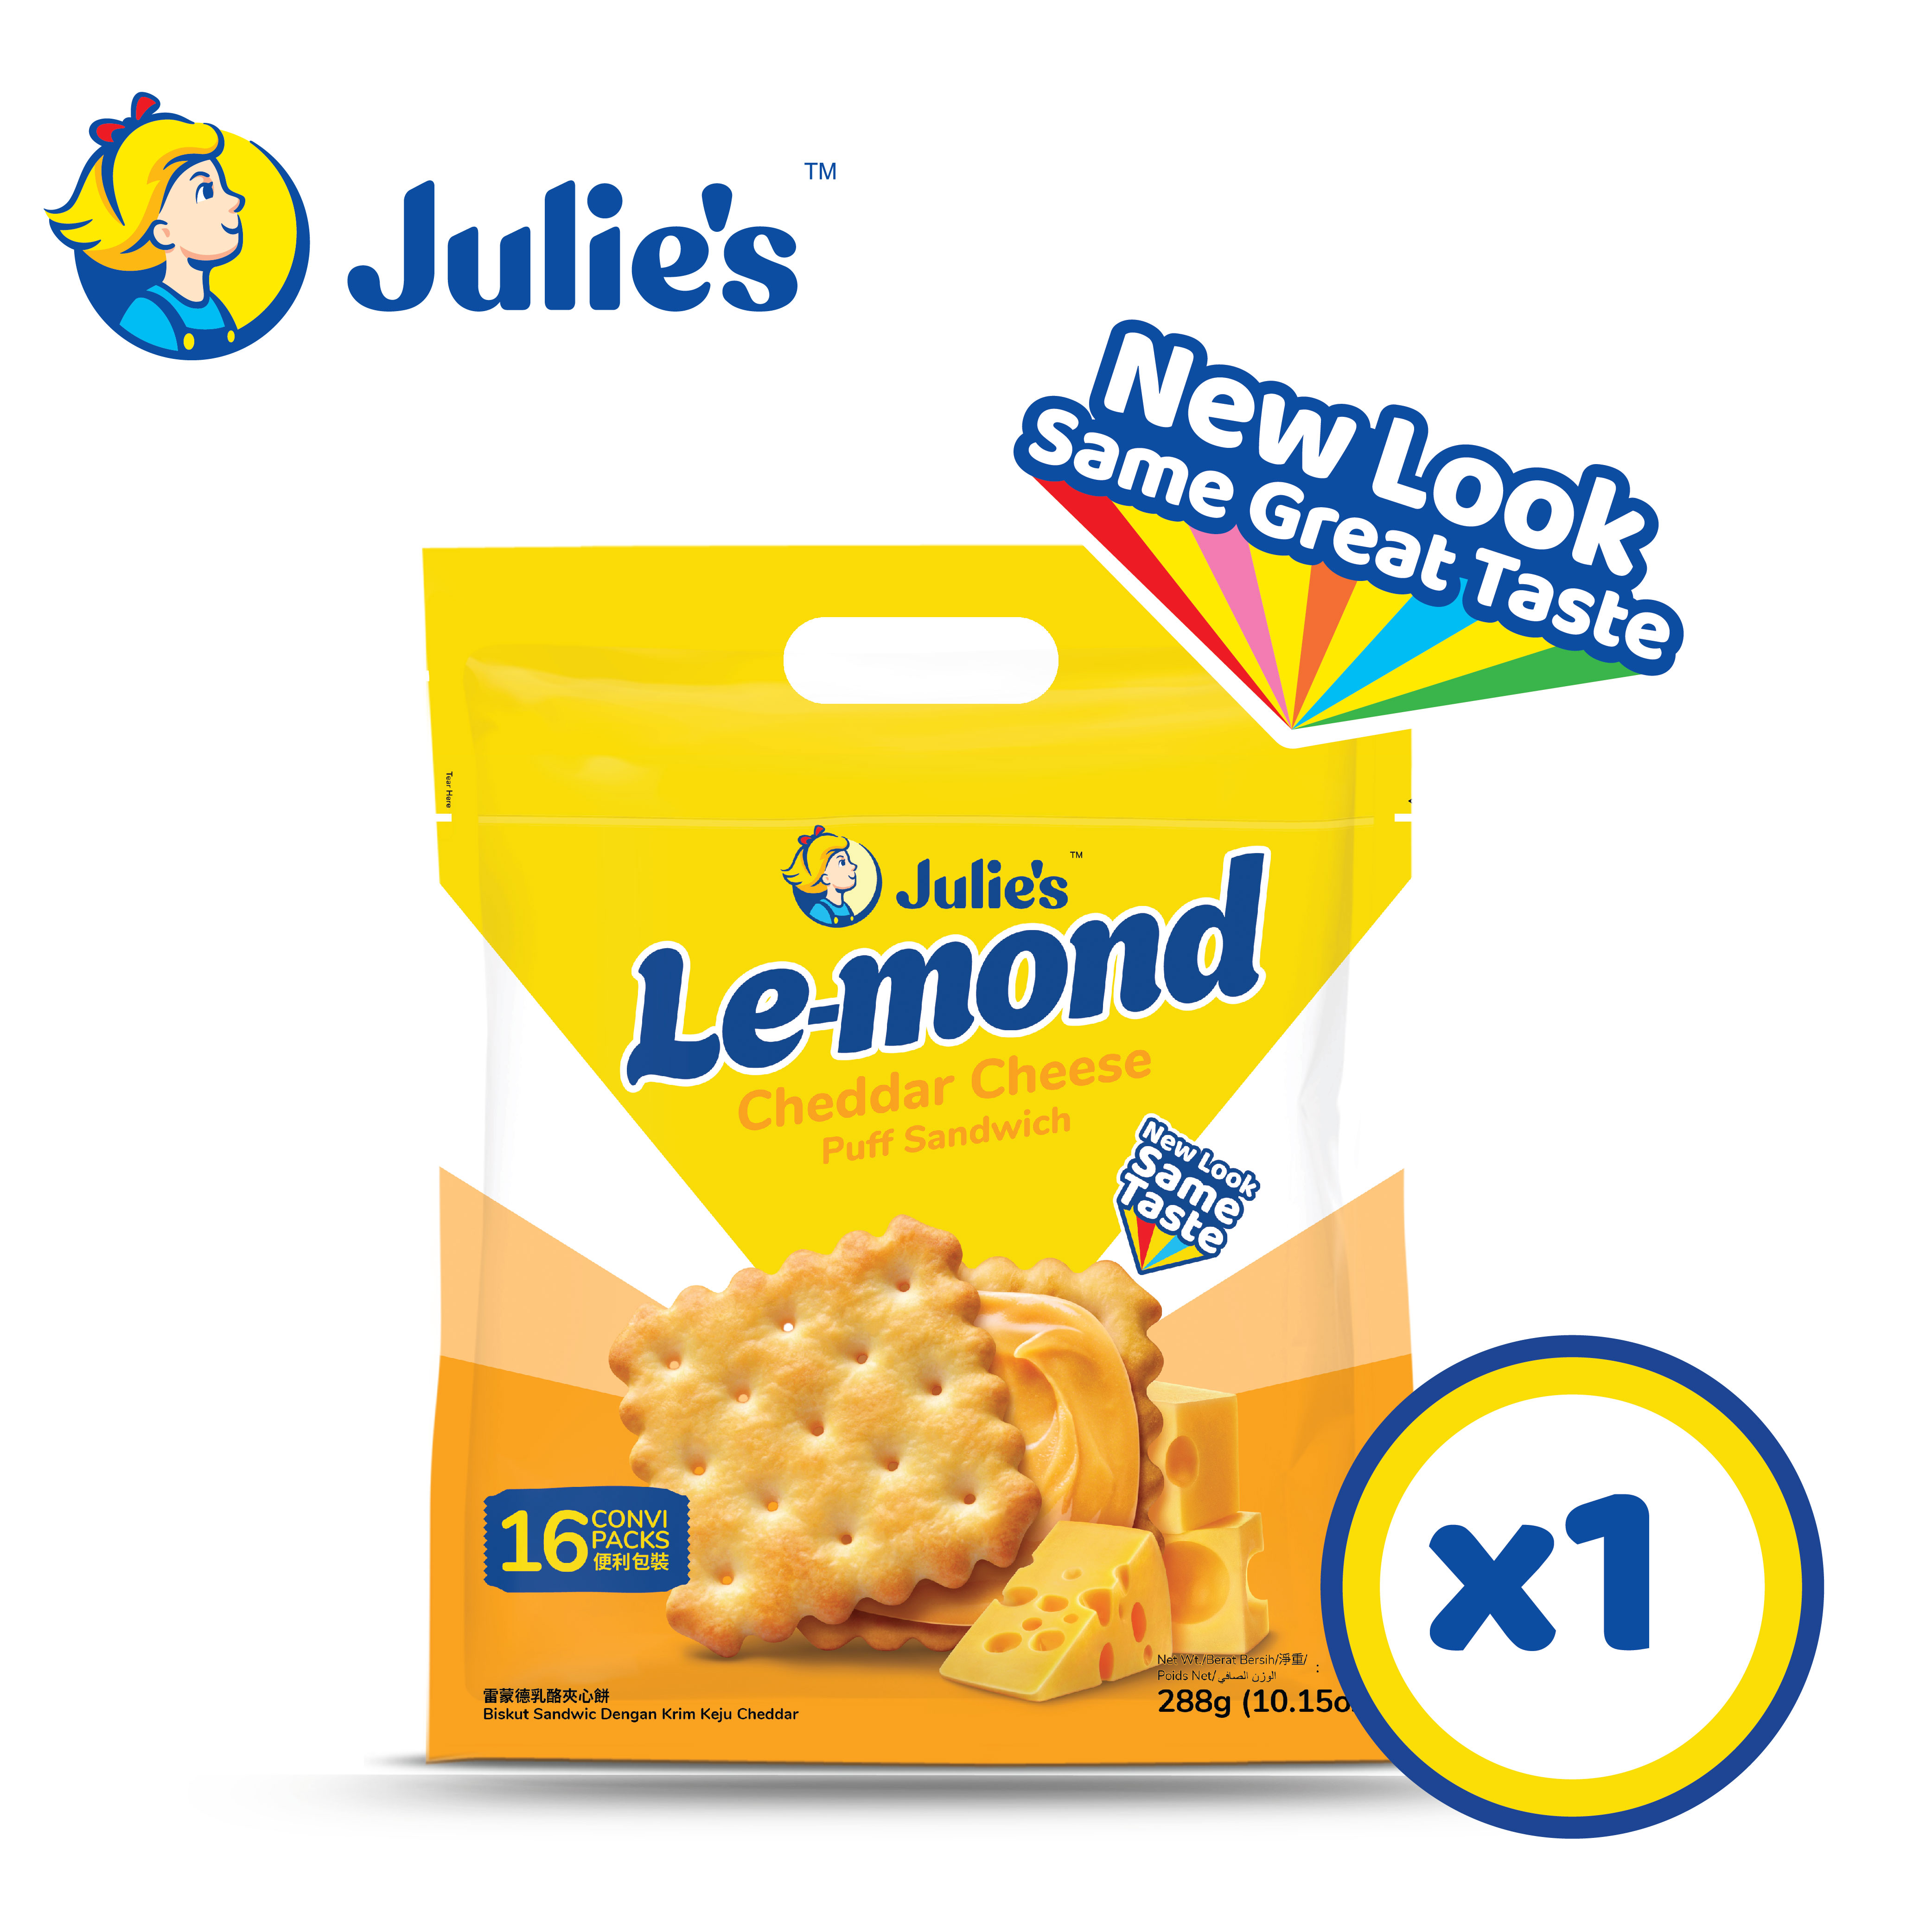 Julie's Le-mond Cheddar Cheese 288g x 1 pack